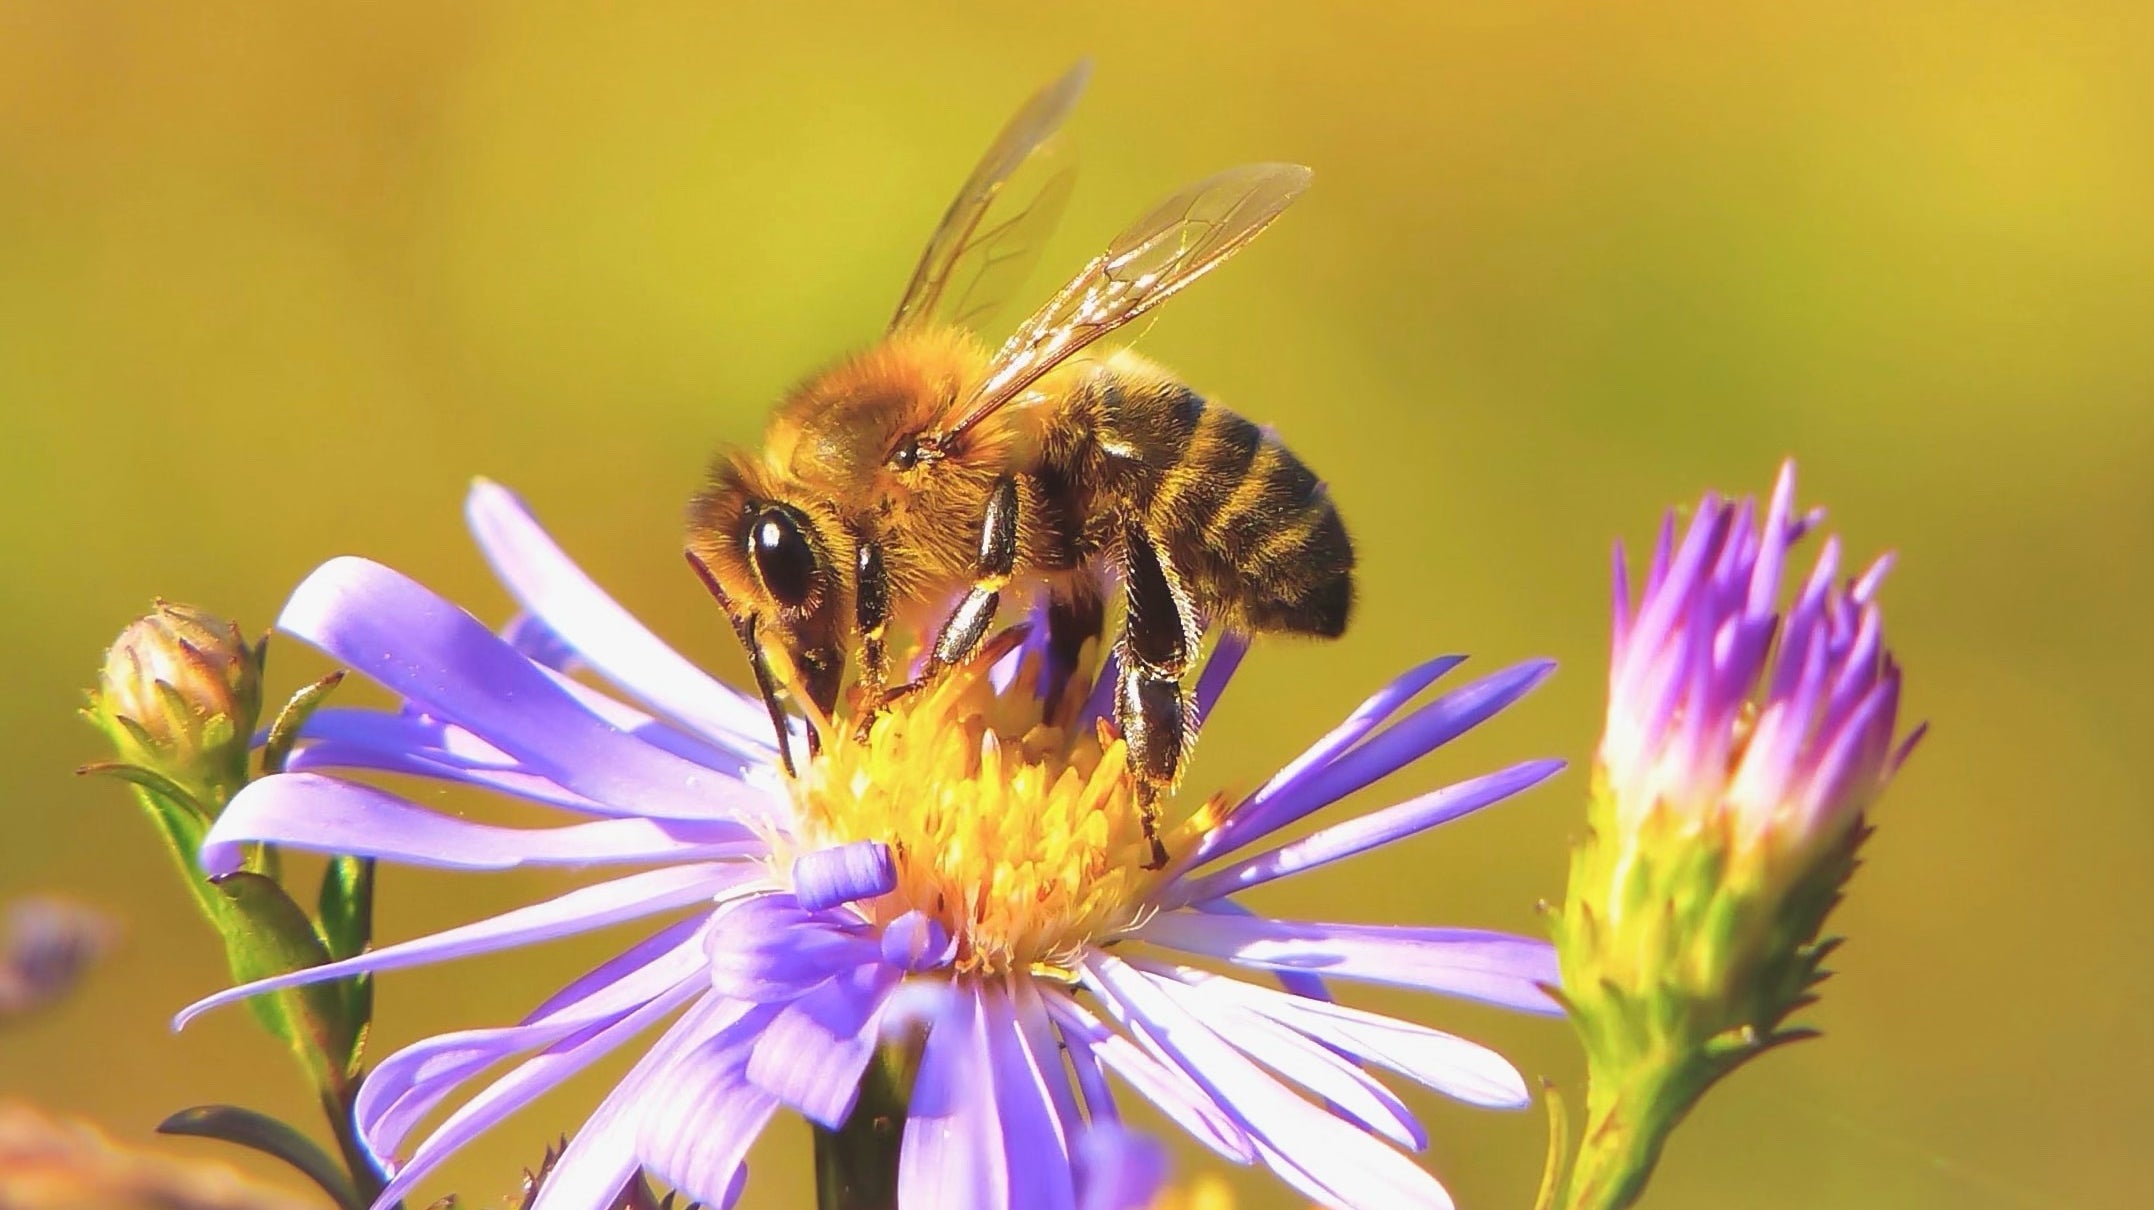 A honey bee pollinating a purple and yellow New England Aster flower